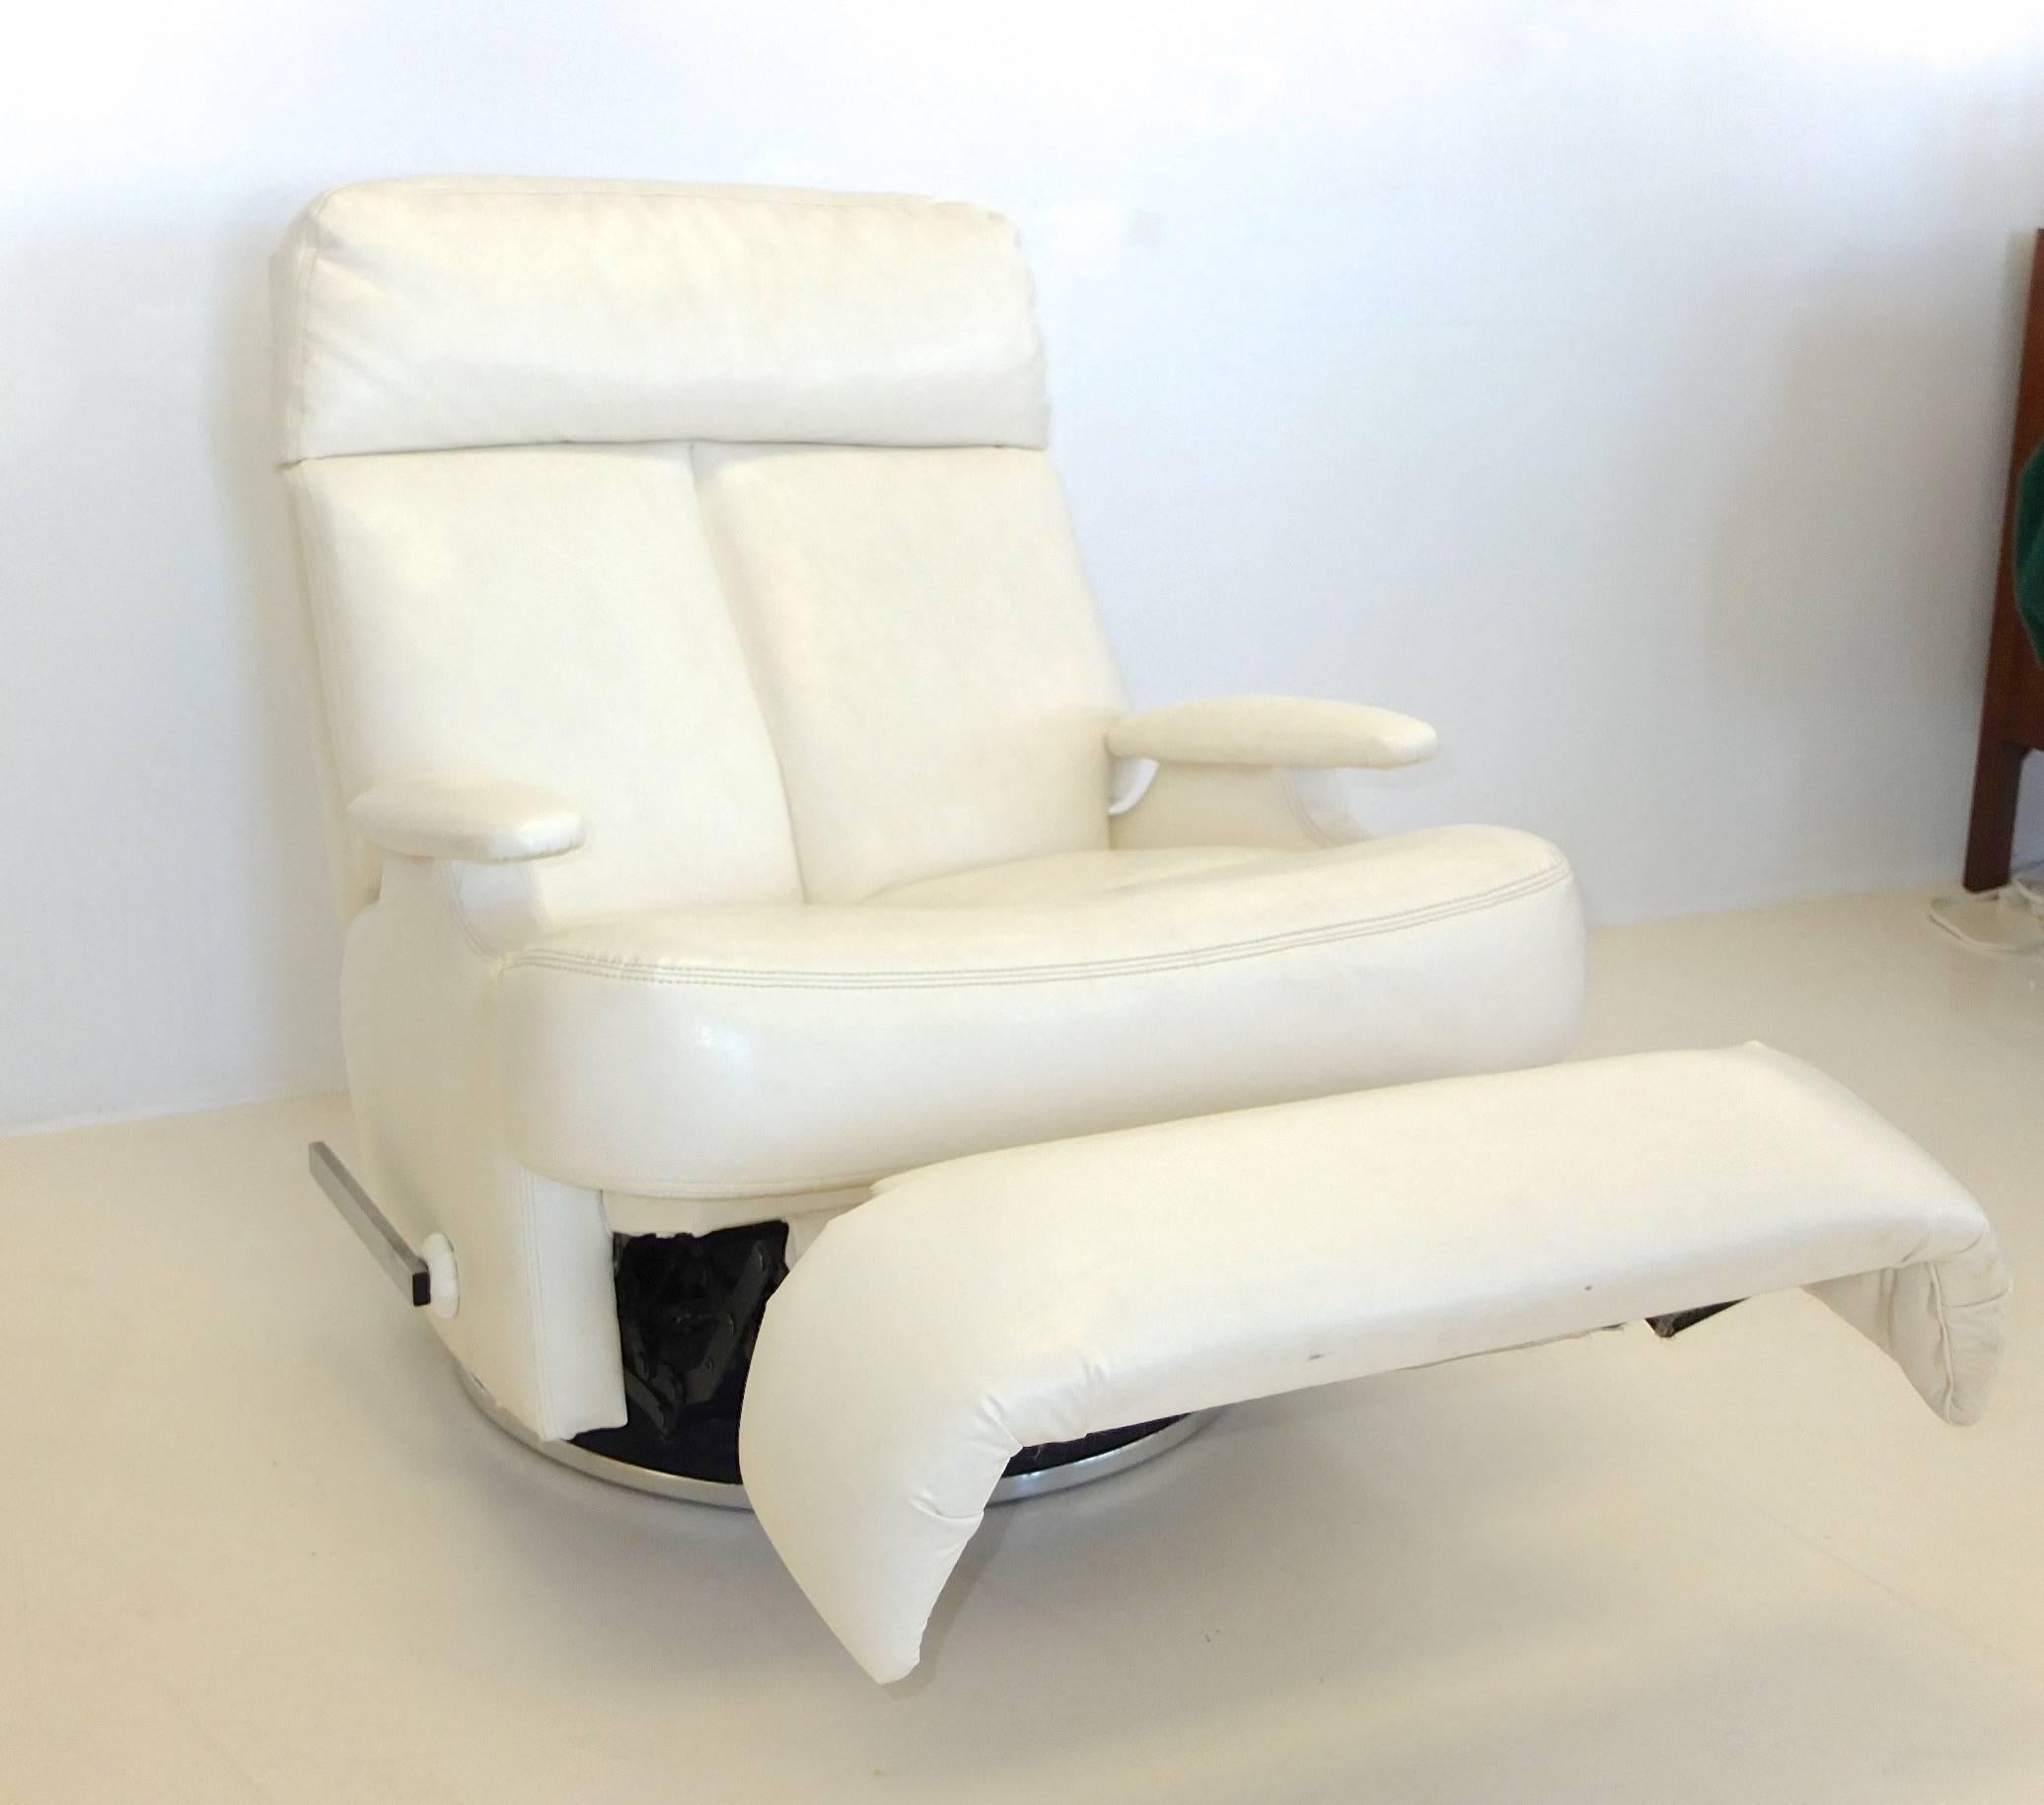 Upgrade to First Class at home (or at sea) with this pair of white kid glove faux-leather reclining swivel lounge chairs on round chrome pedestal bases by The Barcalounger Company of Buffalo, NY.

Since these have such a stable and low center of